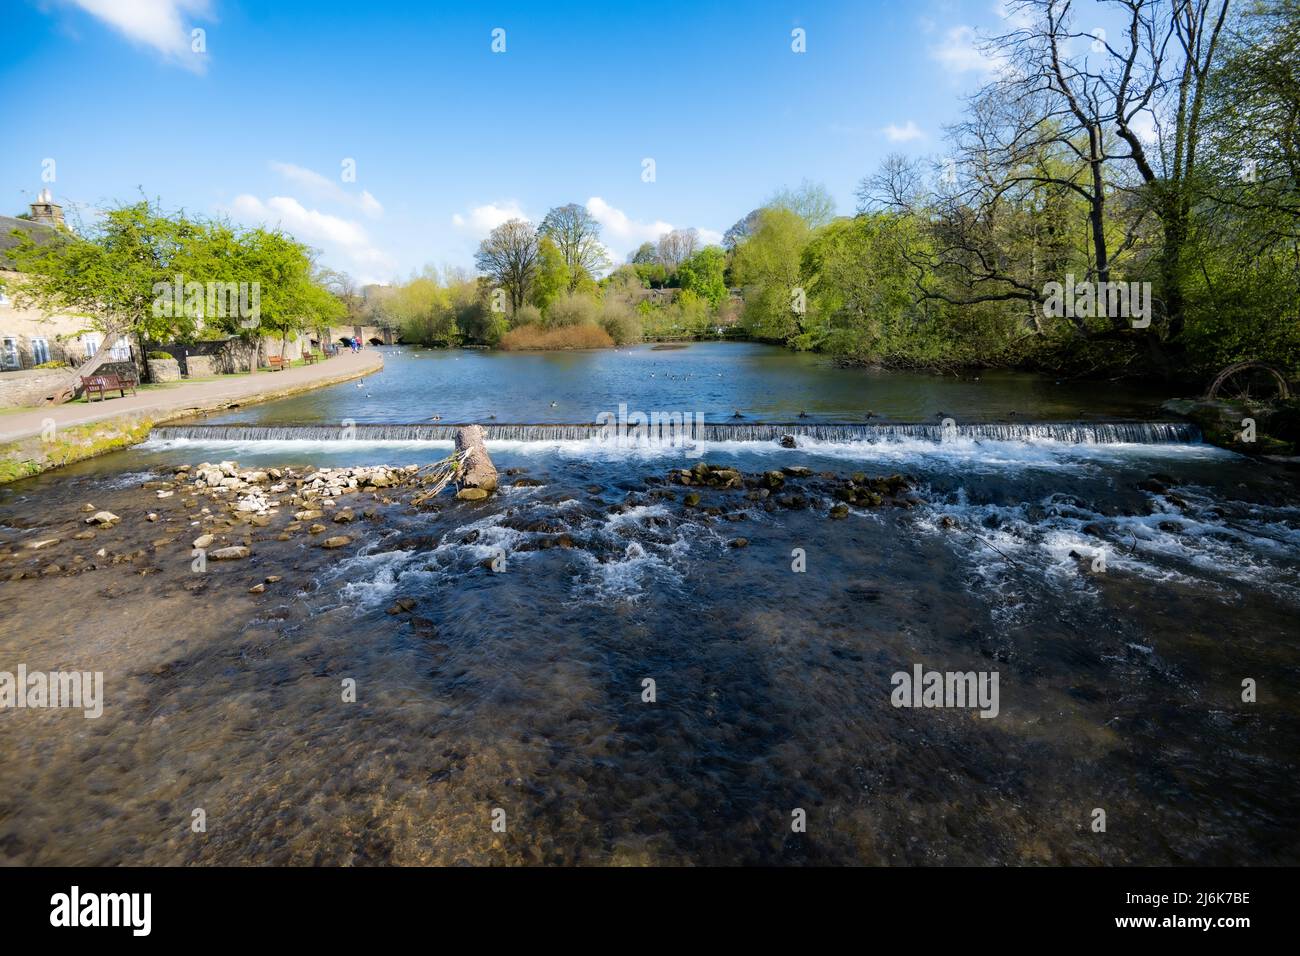 Wear on the River Wye at Bakewell, Derbyshire, UK Stock Photo